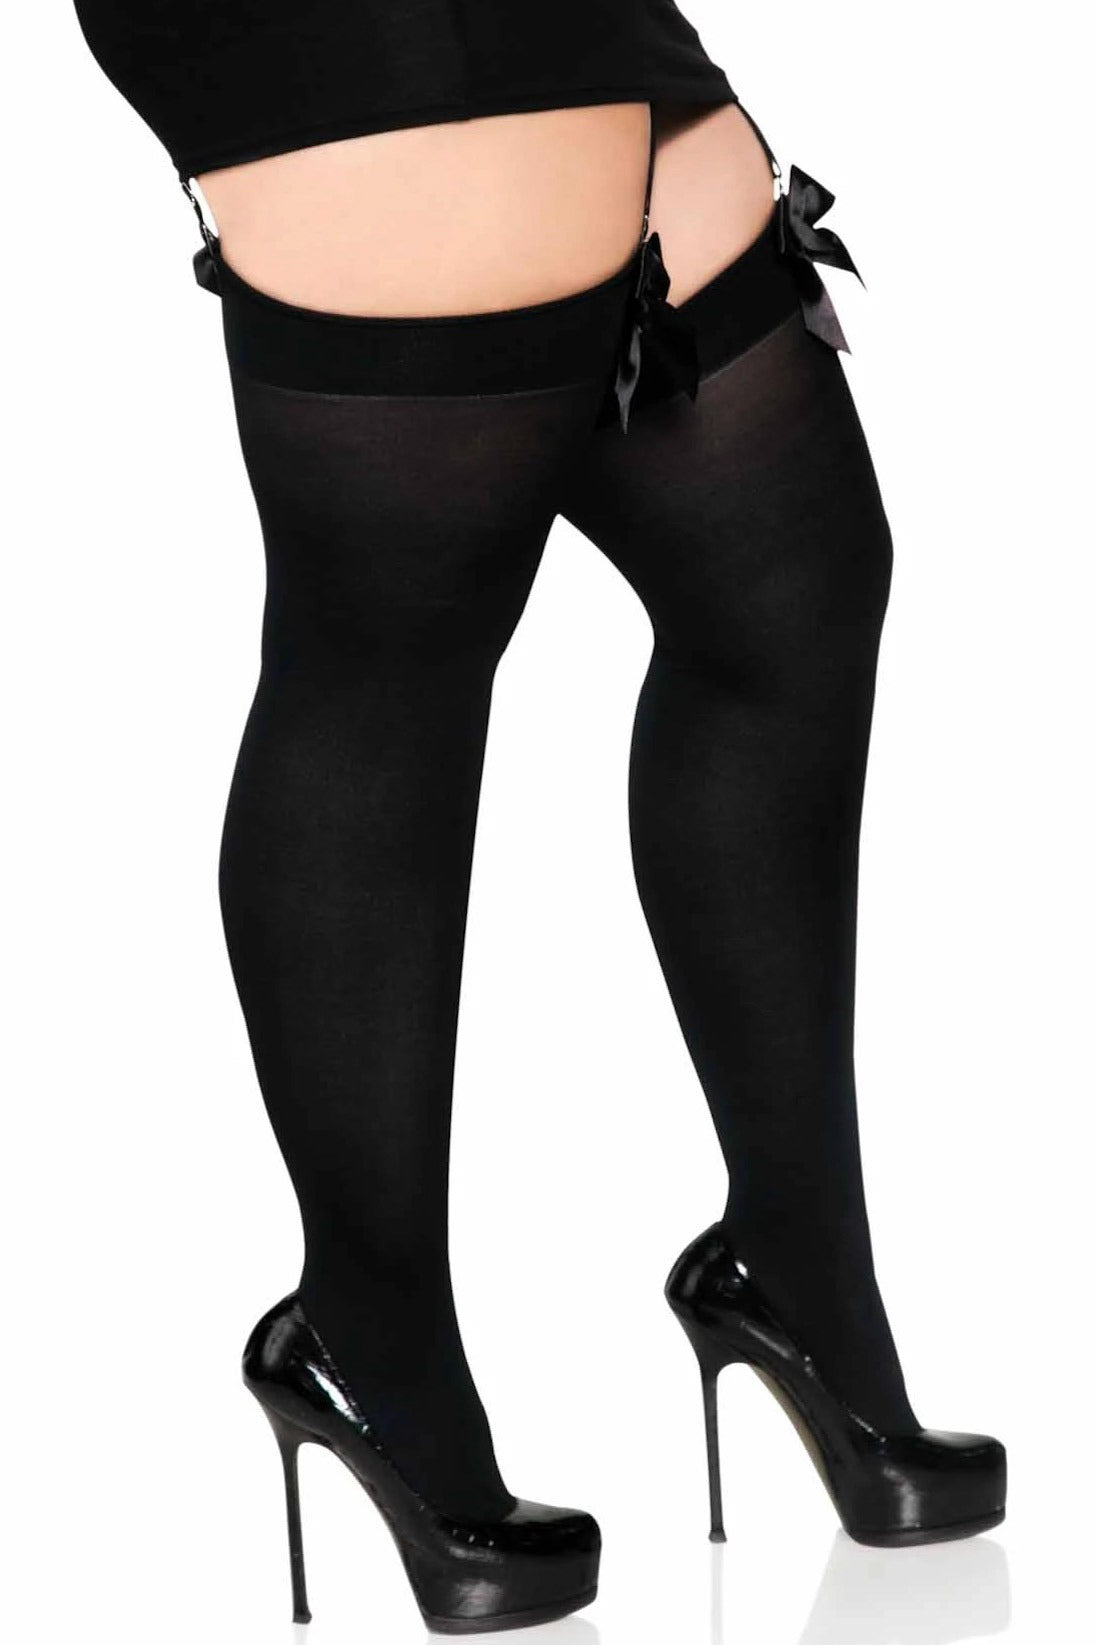 Bow Top Opaque Thigh Highs